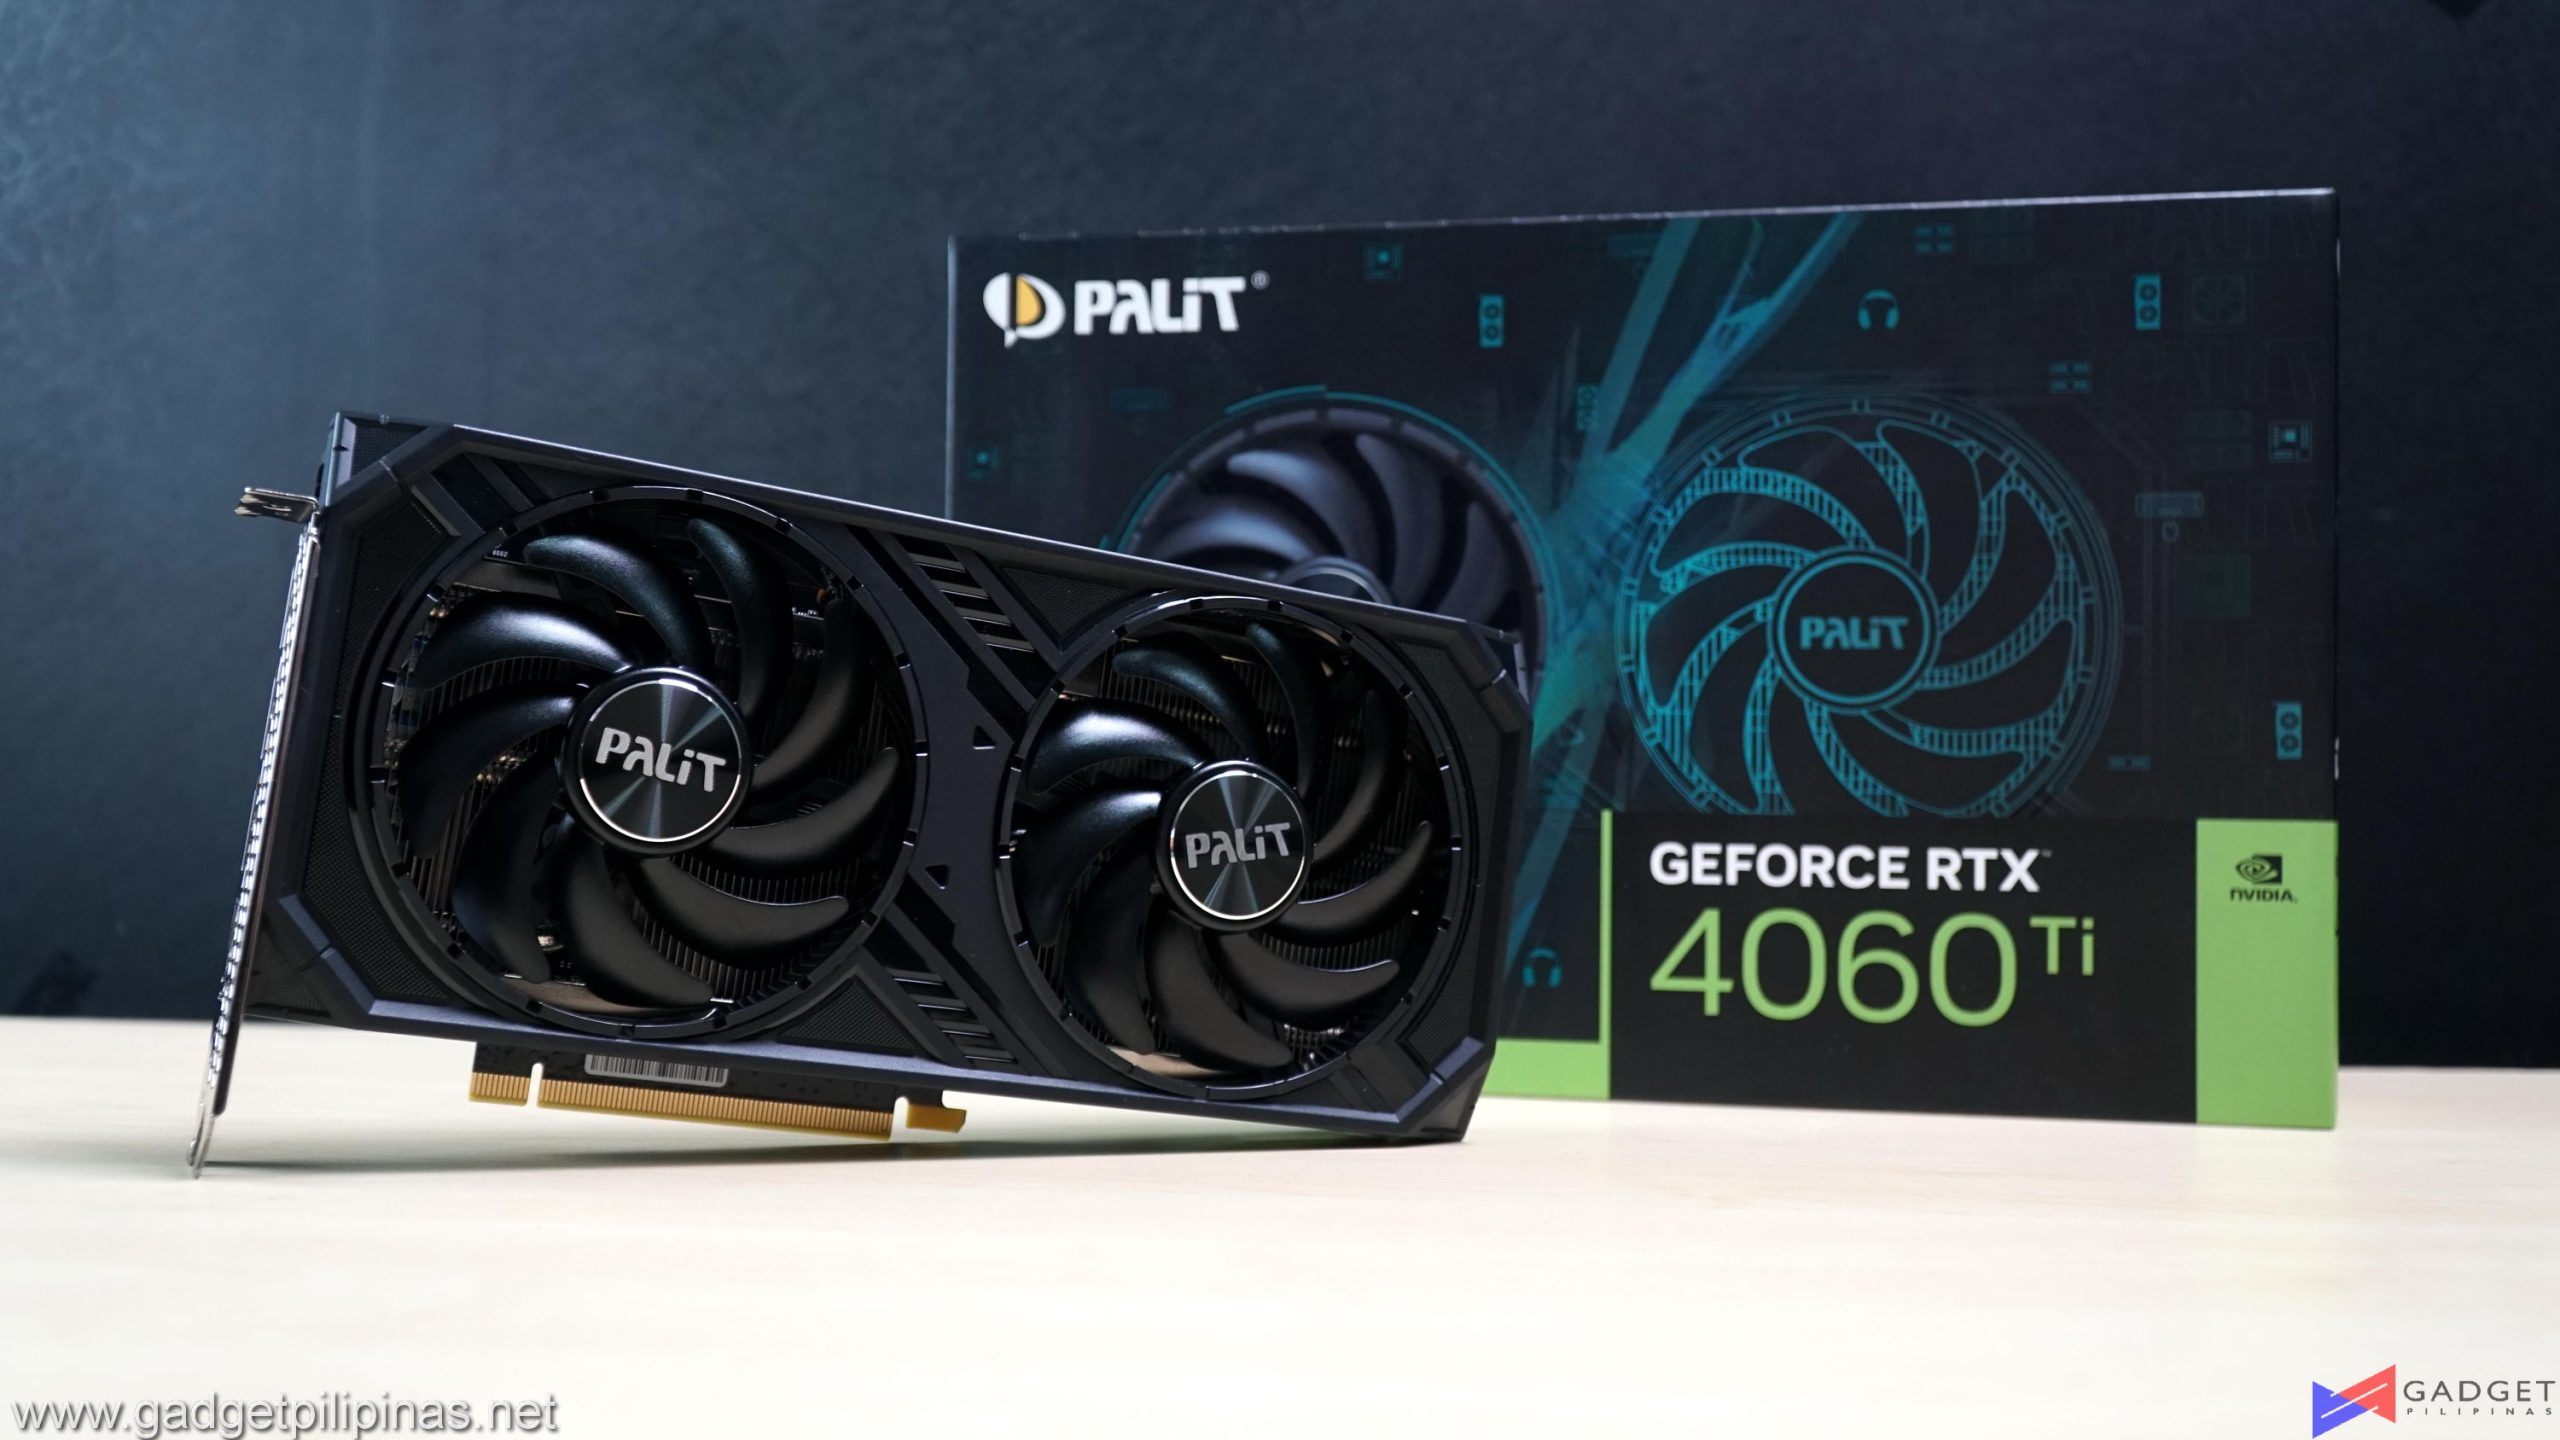 Palit RTX 4060 Ti DUAL 8GB Graphics Card Review - Entry Level But